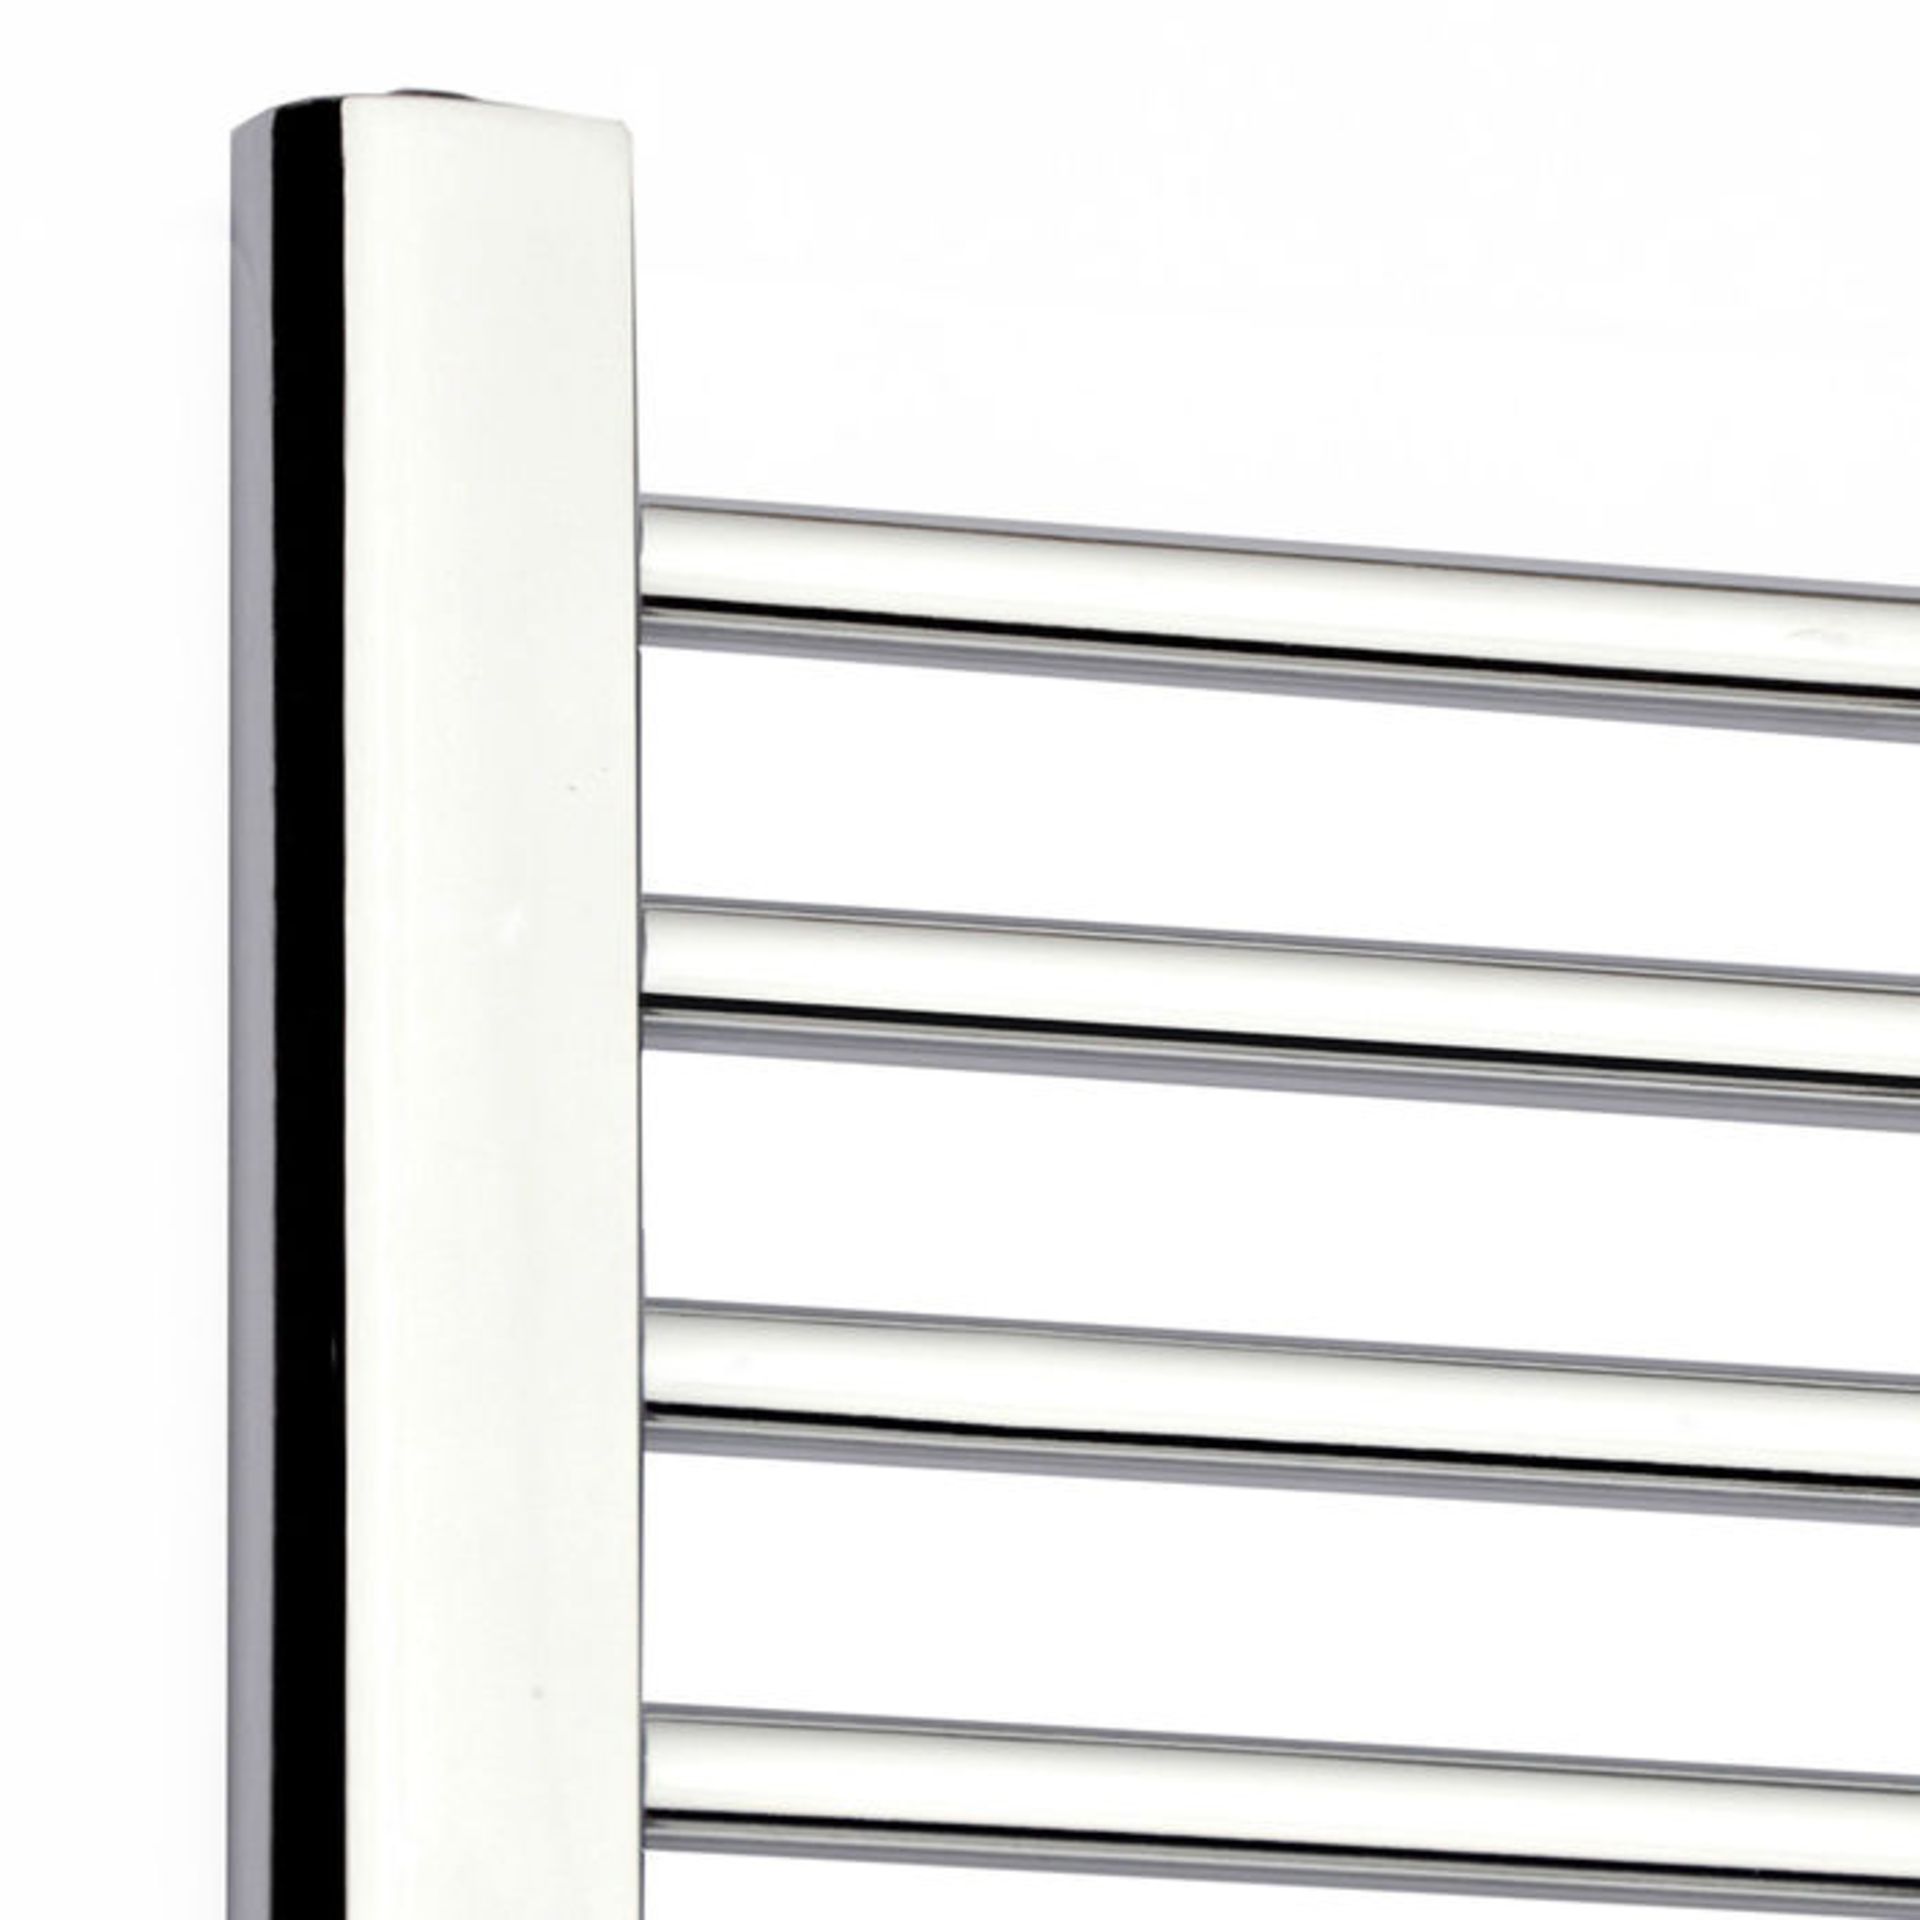 (XM113) 1600x400mm - 20mm Tubes - Chrome Heated Straight Rail Ladder Towel Radiator. Made from - Image 4 of 4